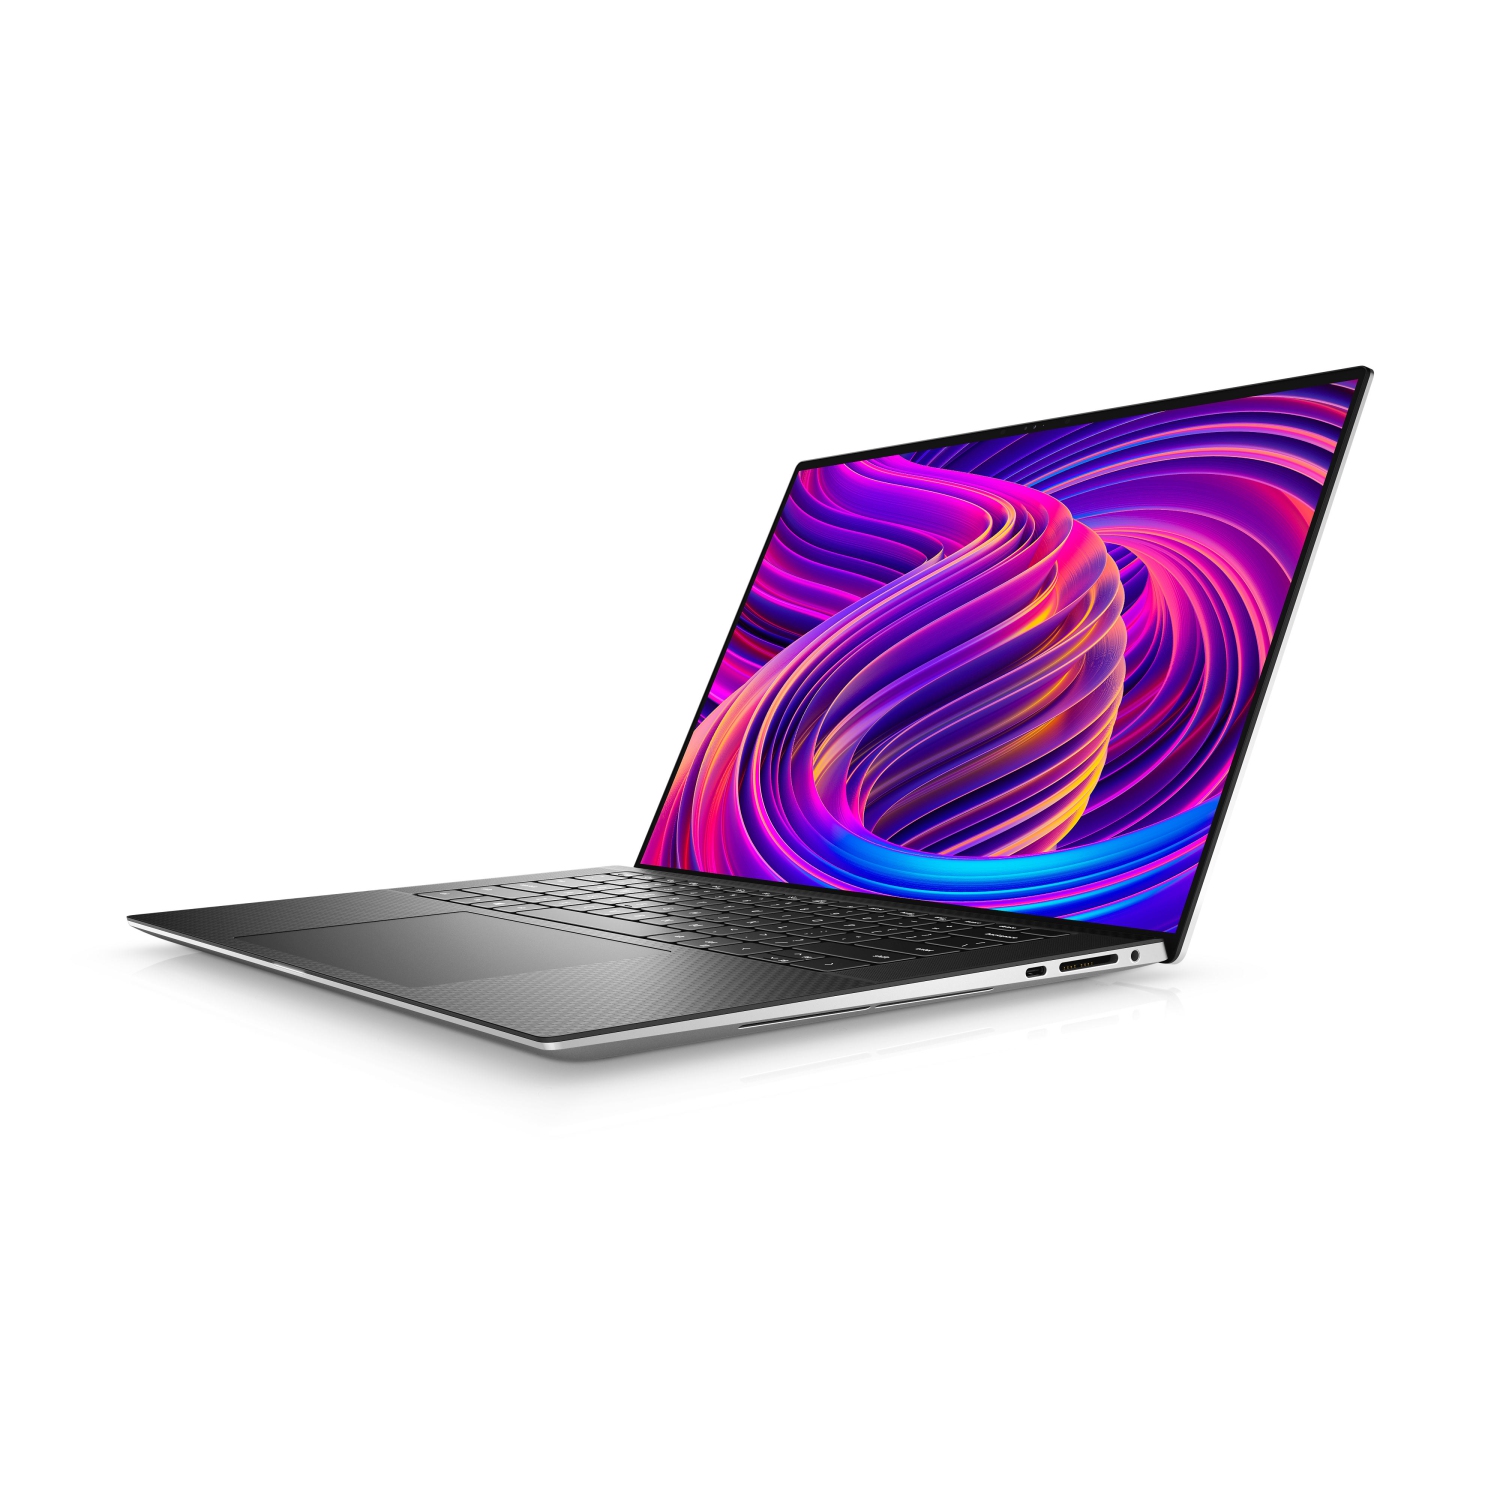 Refurbished (Excellent) - Dell XPS 15 9510 Laptop (2021), 15.6" 4K Touch, Core i7, 512GB SSD, 64GB RAM, RTX 3050, 8 Cores @ 4.6 GHz, 11th Gen CPU Certified Refurbished